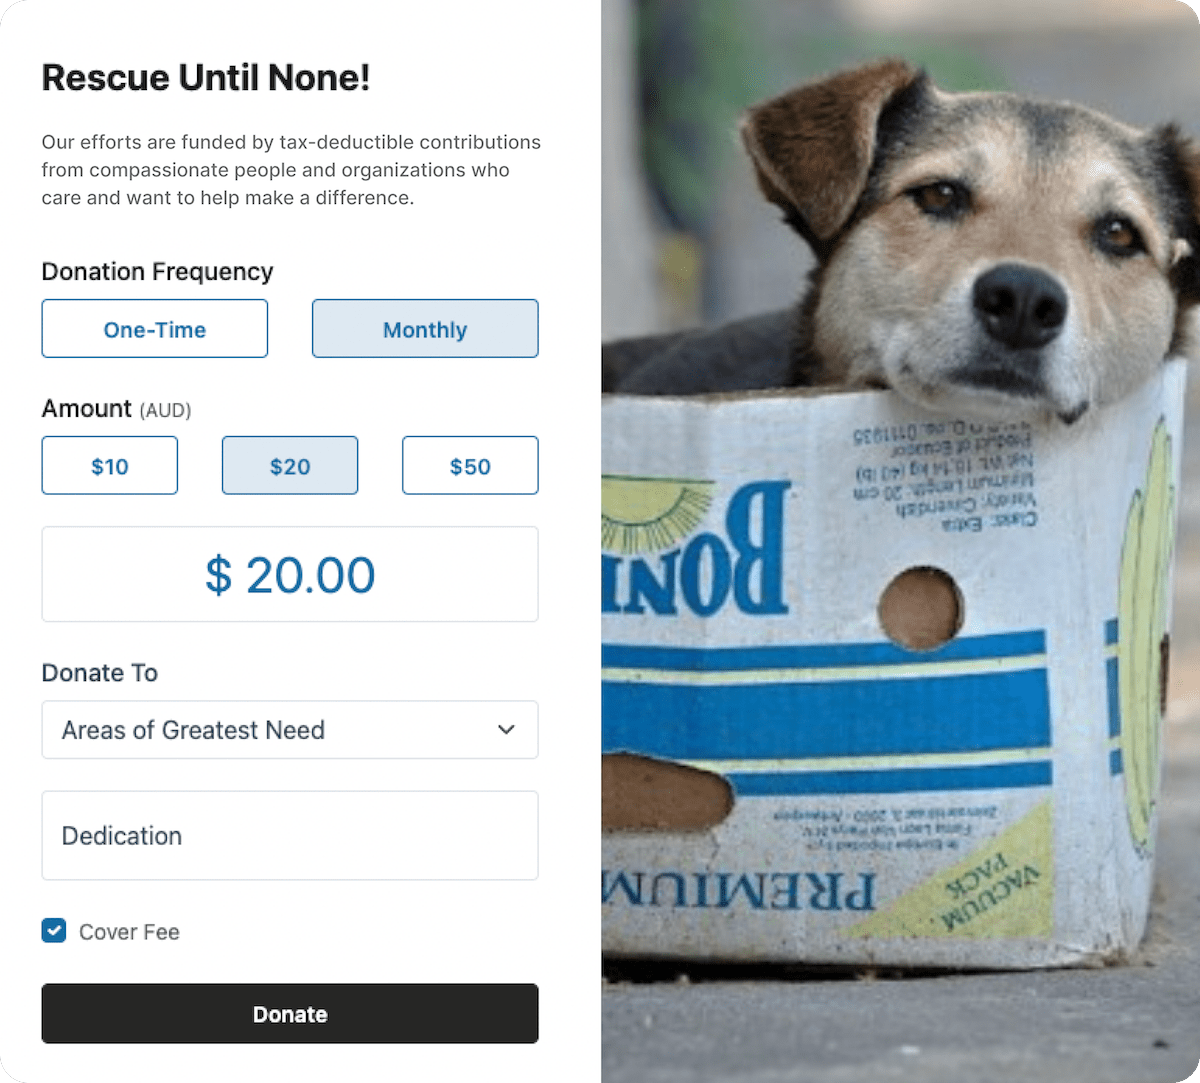 A fundraising form with an image of a dog